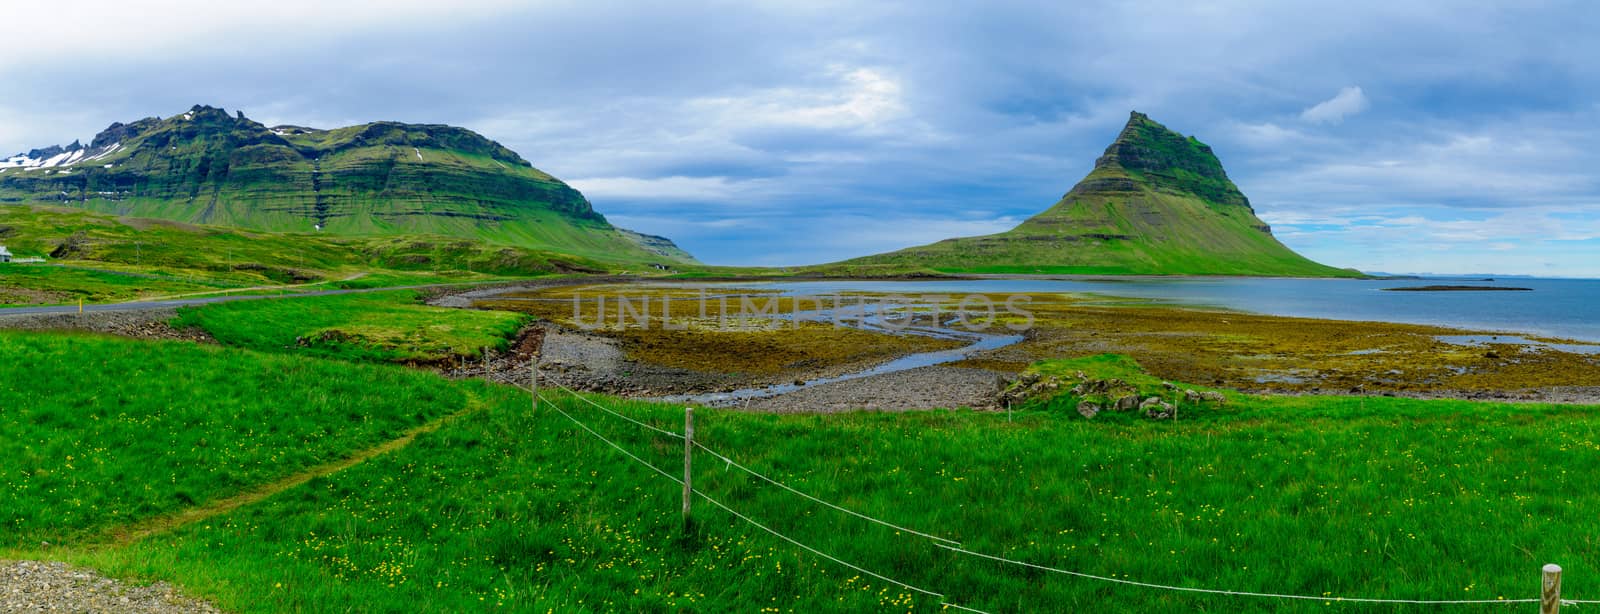 Landscape and the Kirkjufell mountain by RnDmS